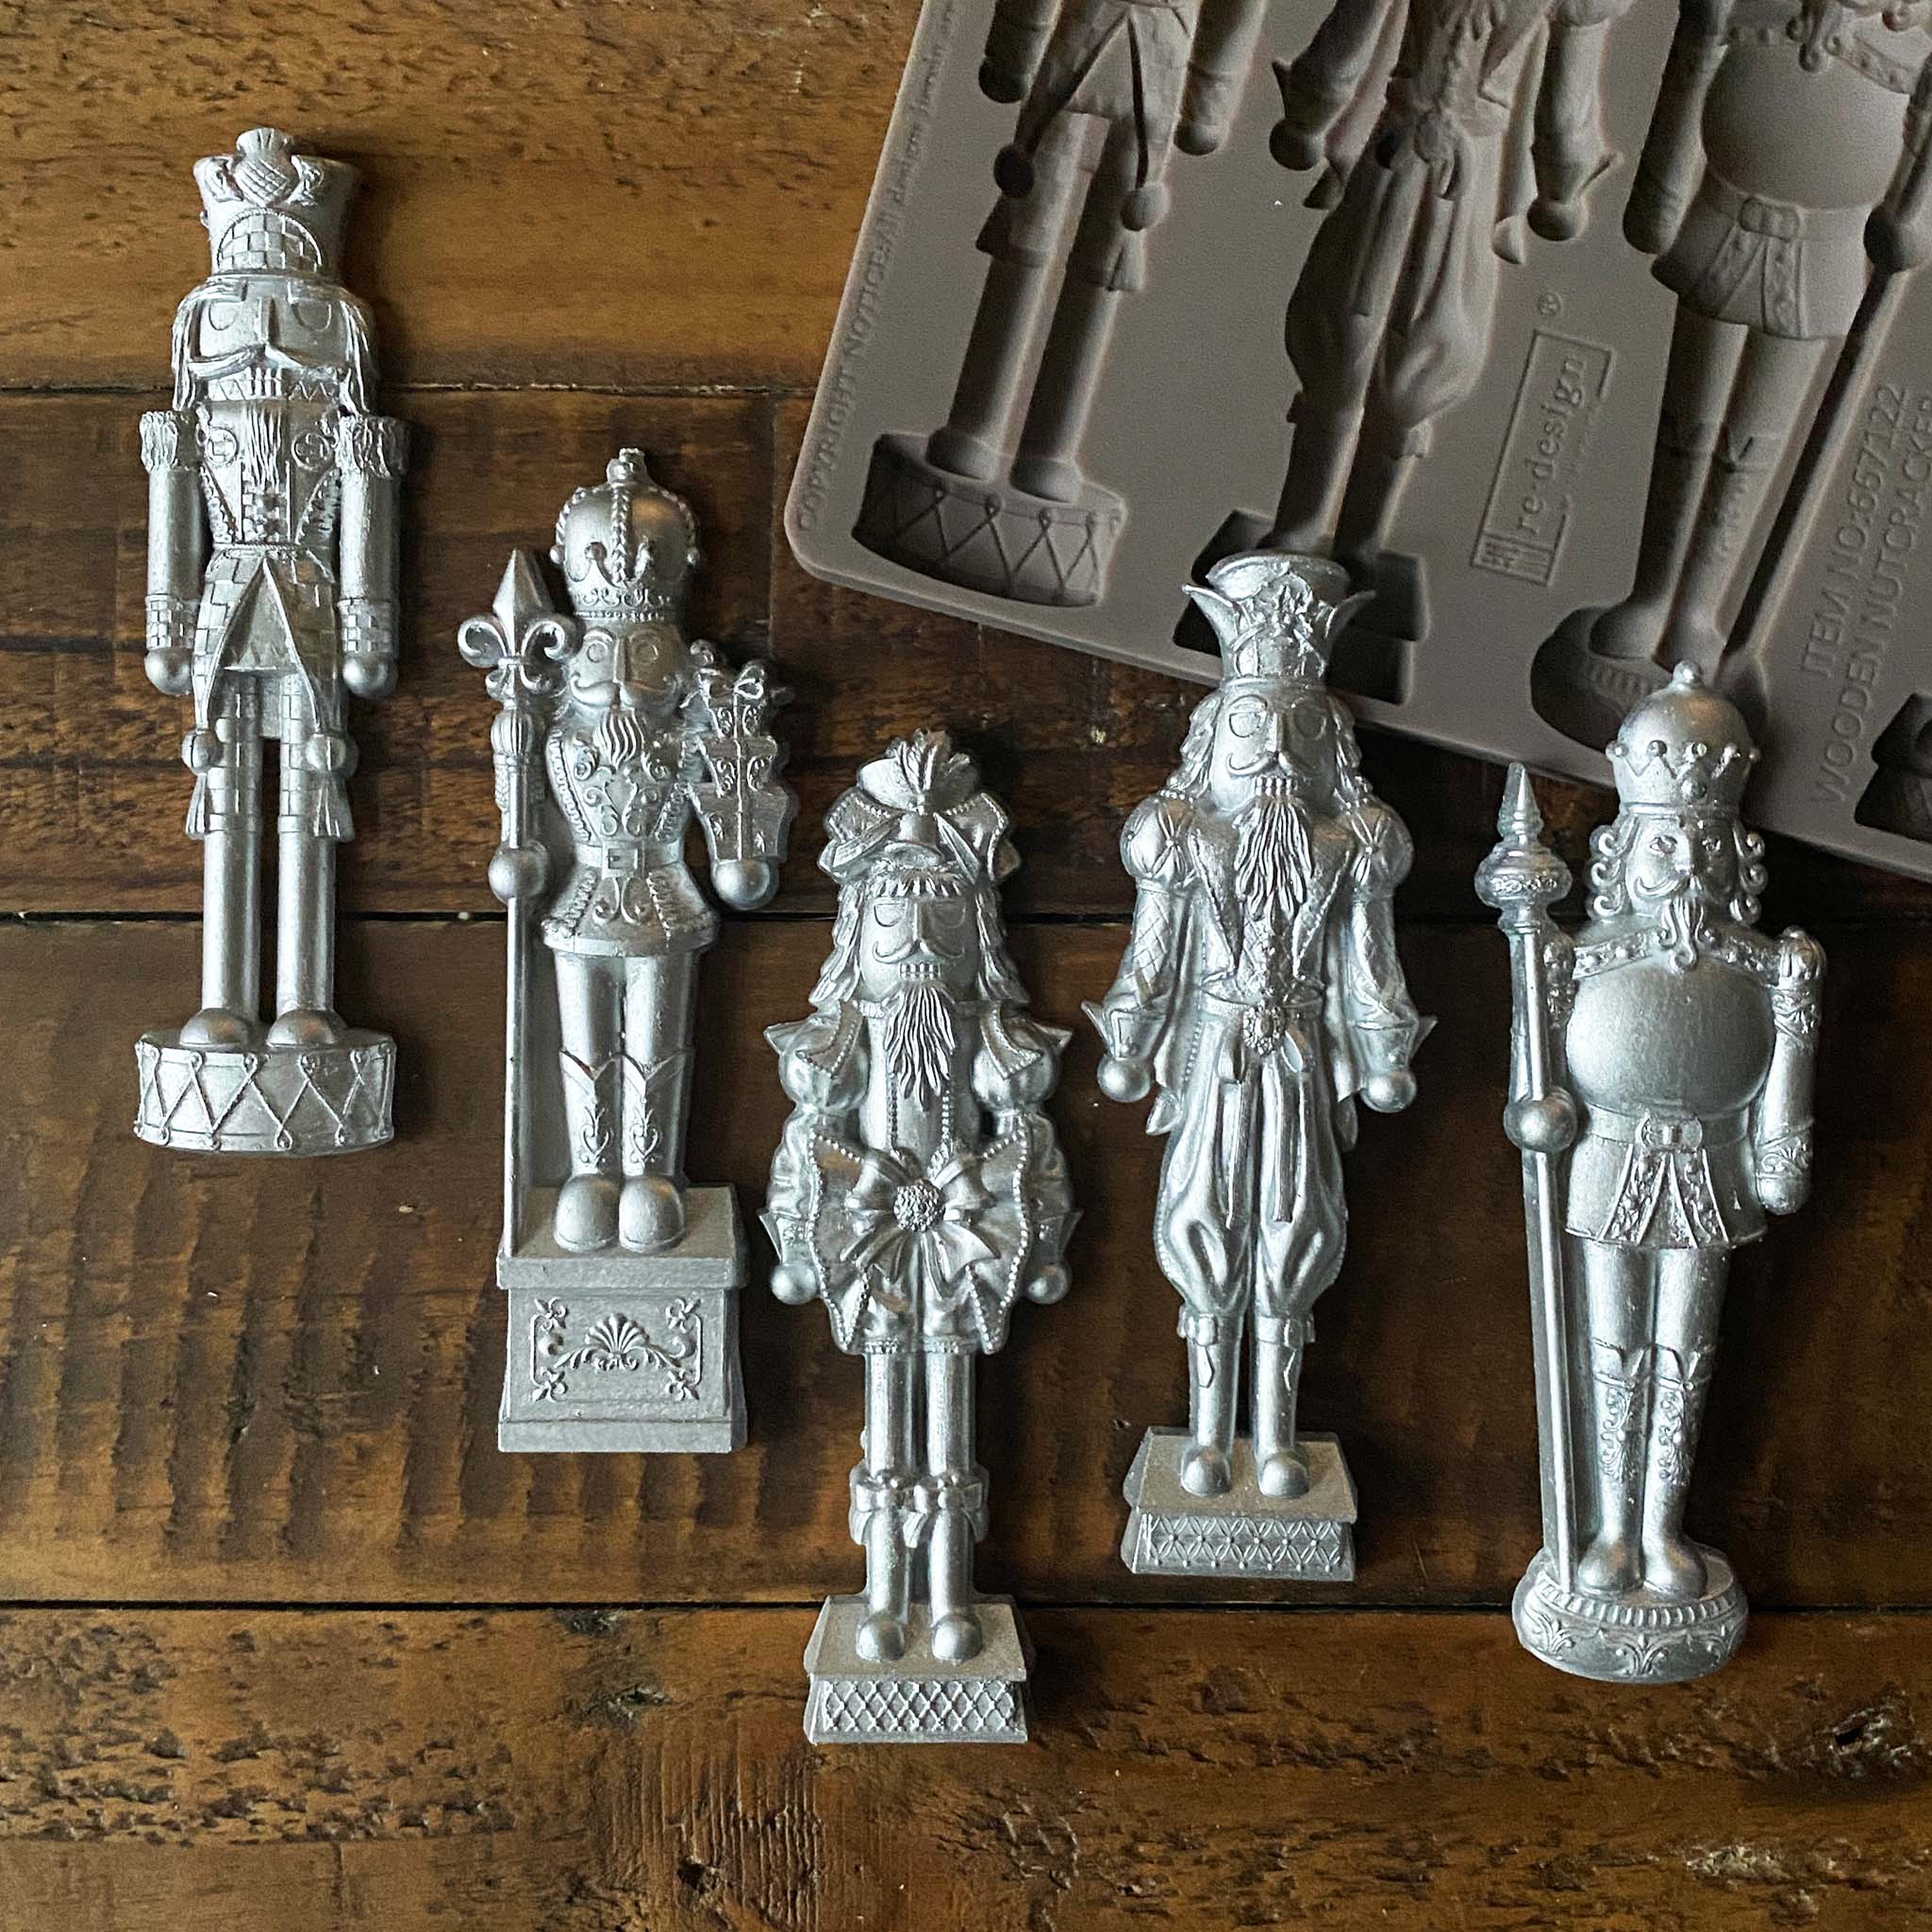 Pre-Order: Wooden Nutcracker Silicone Mould - Limited Edition